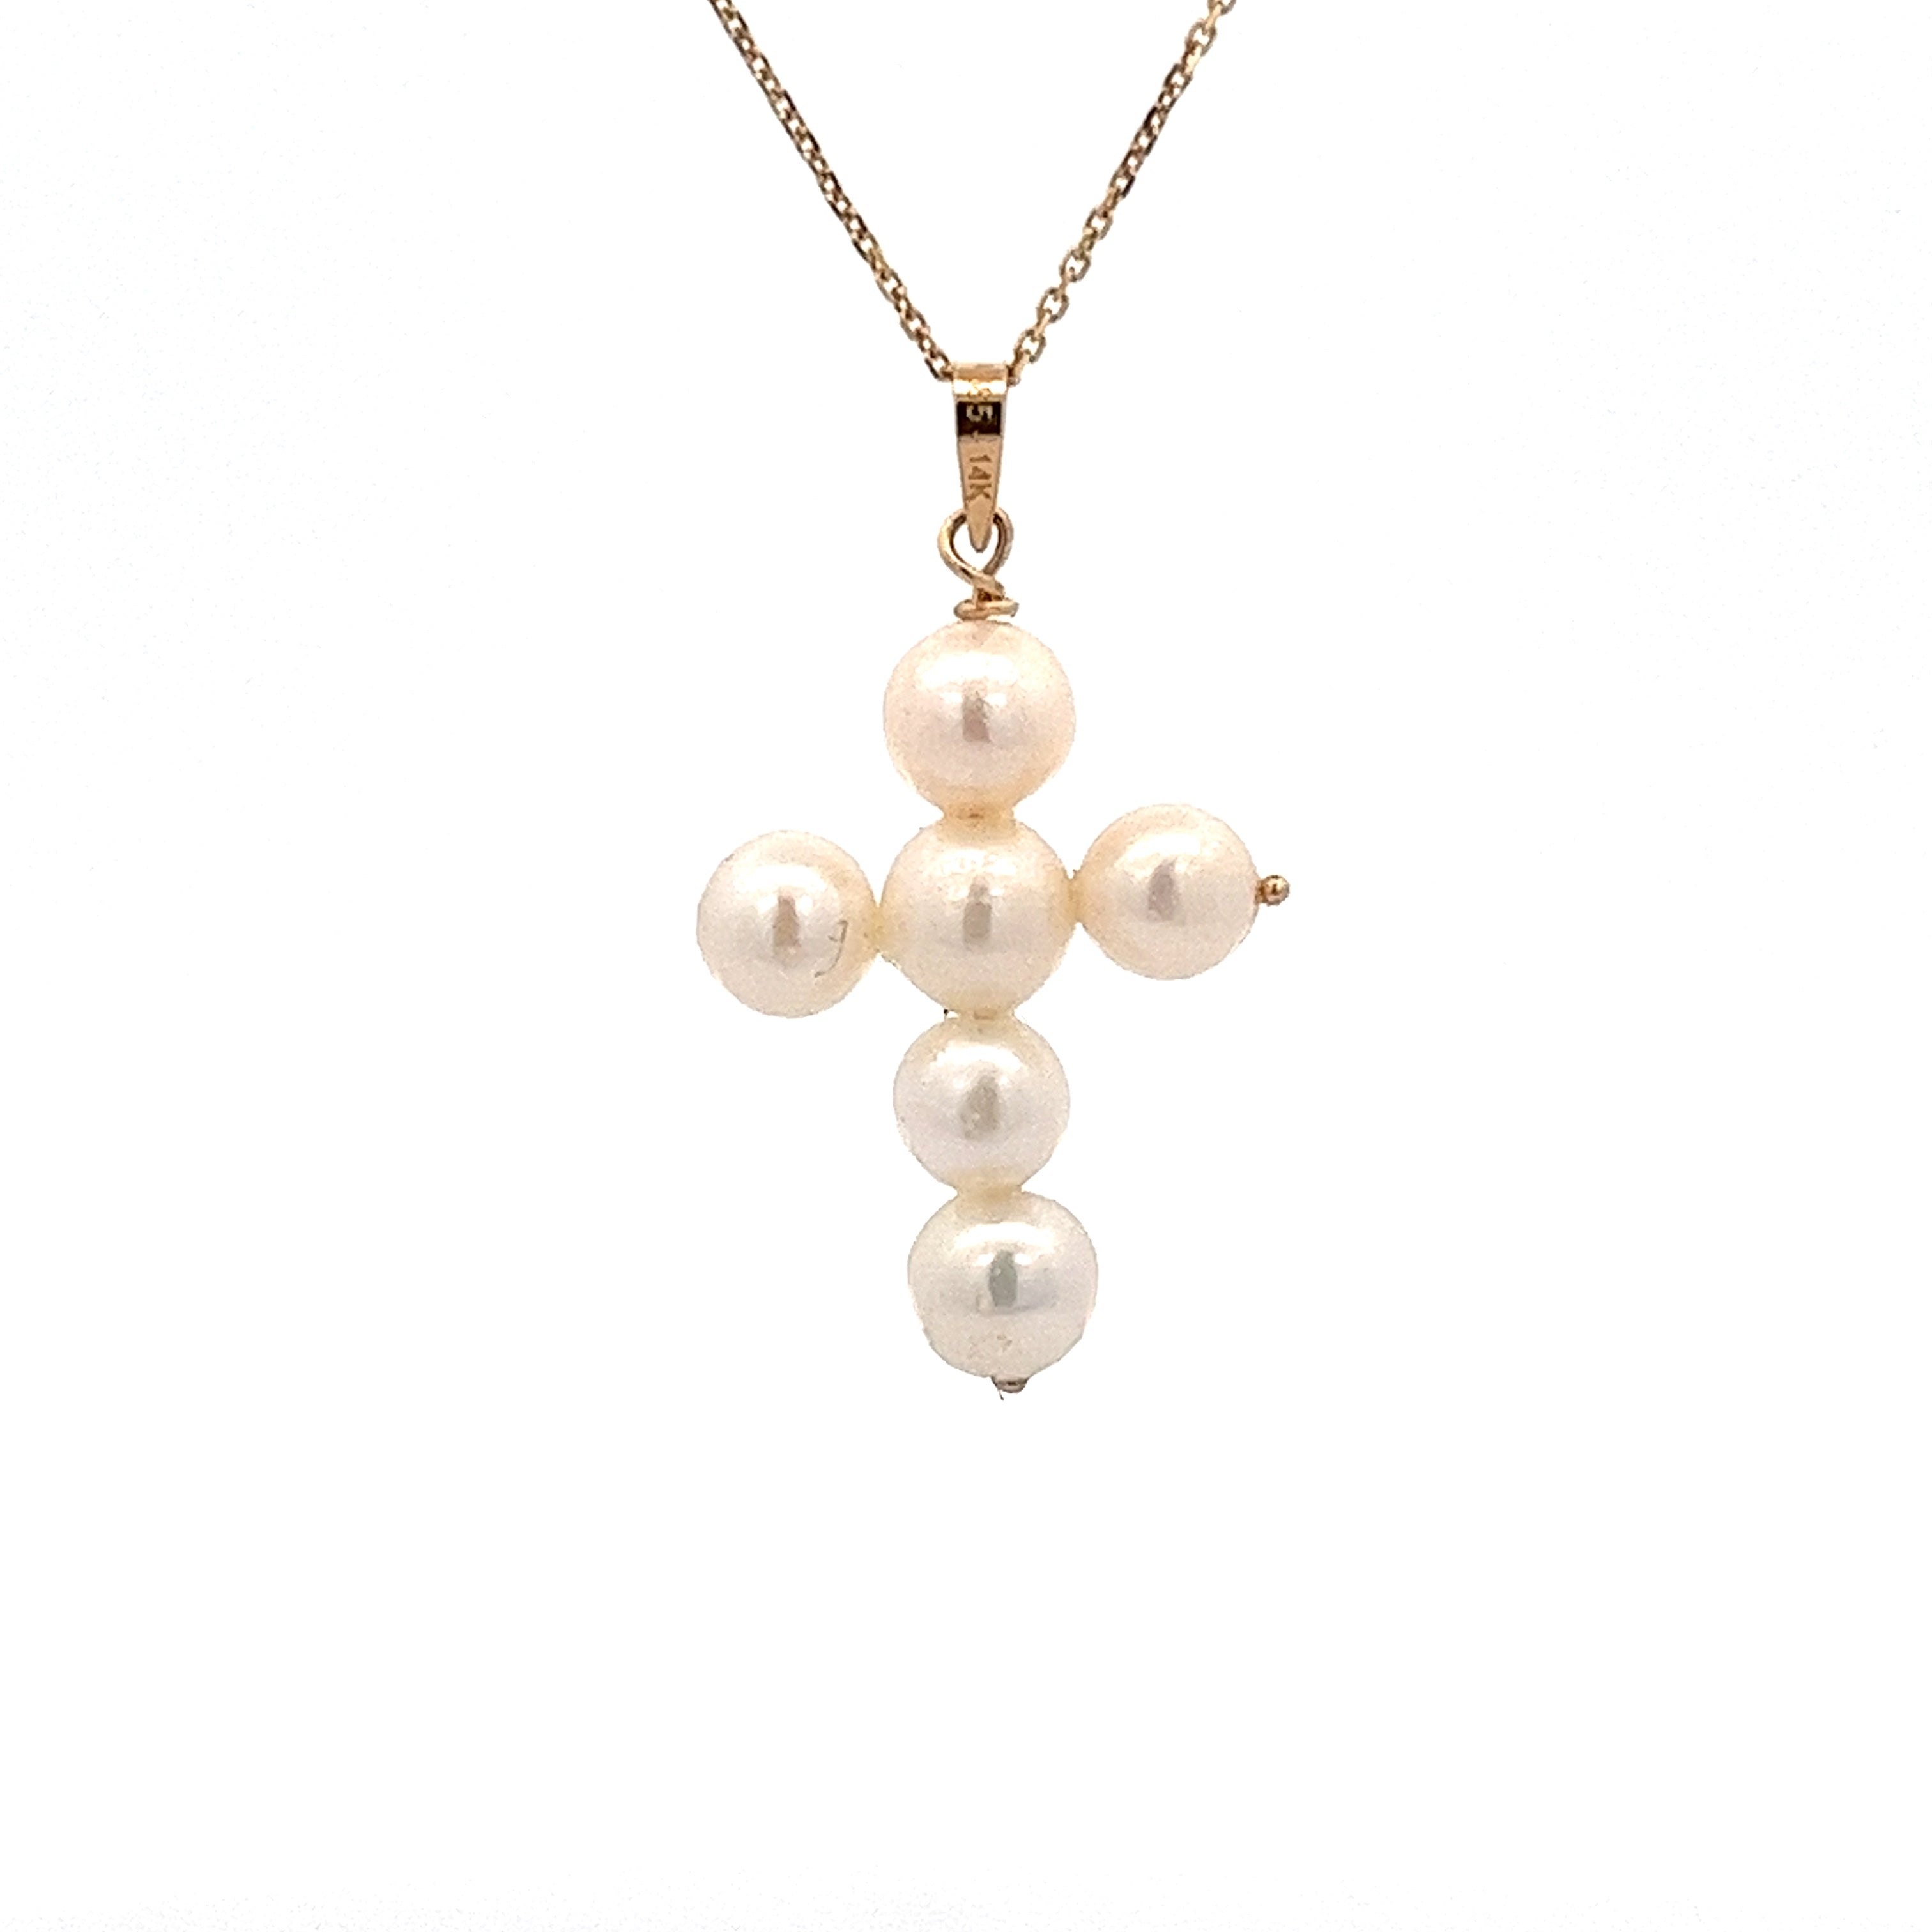 14K GOLD CROSS PENDANT WITH PEARLS